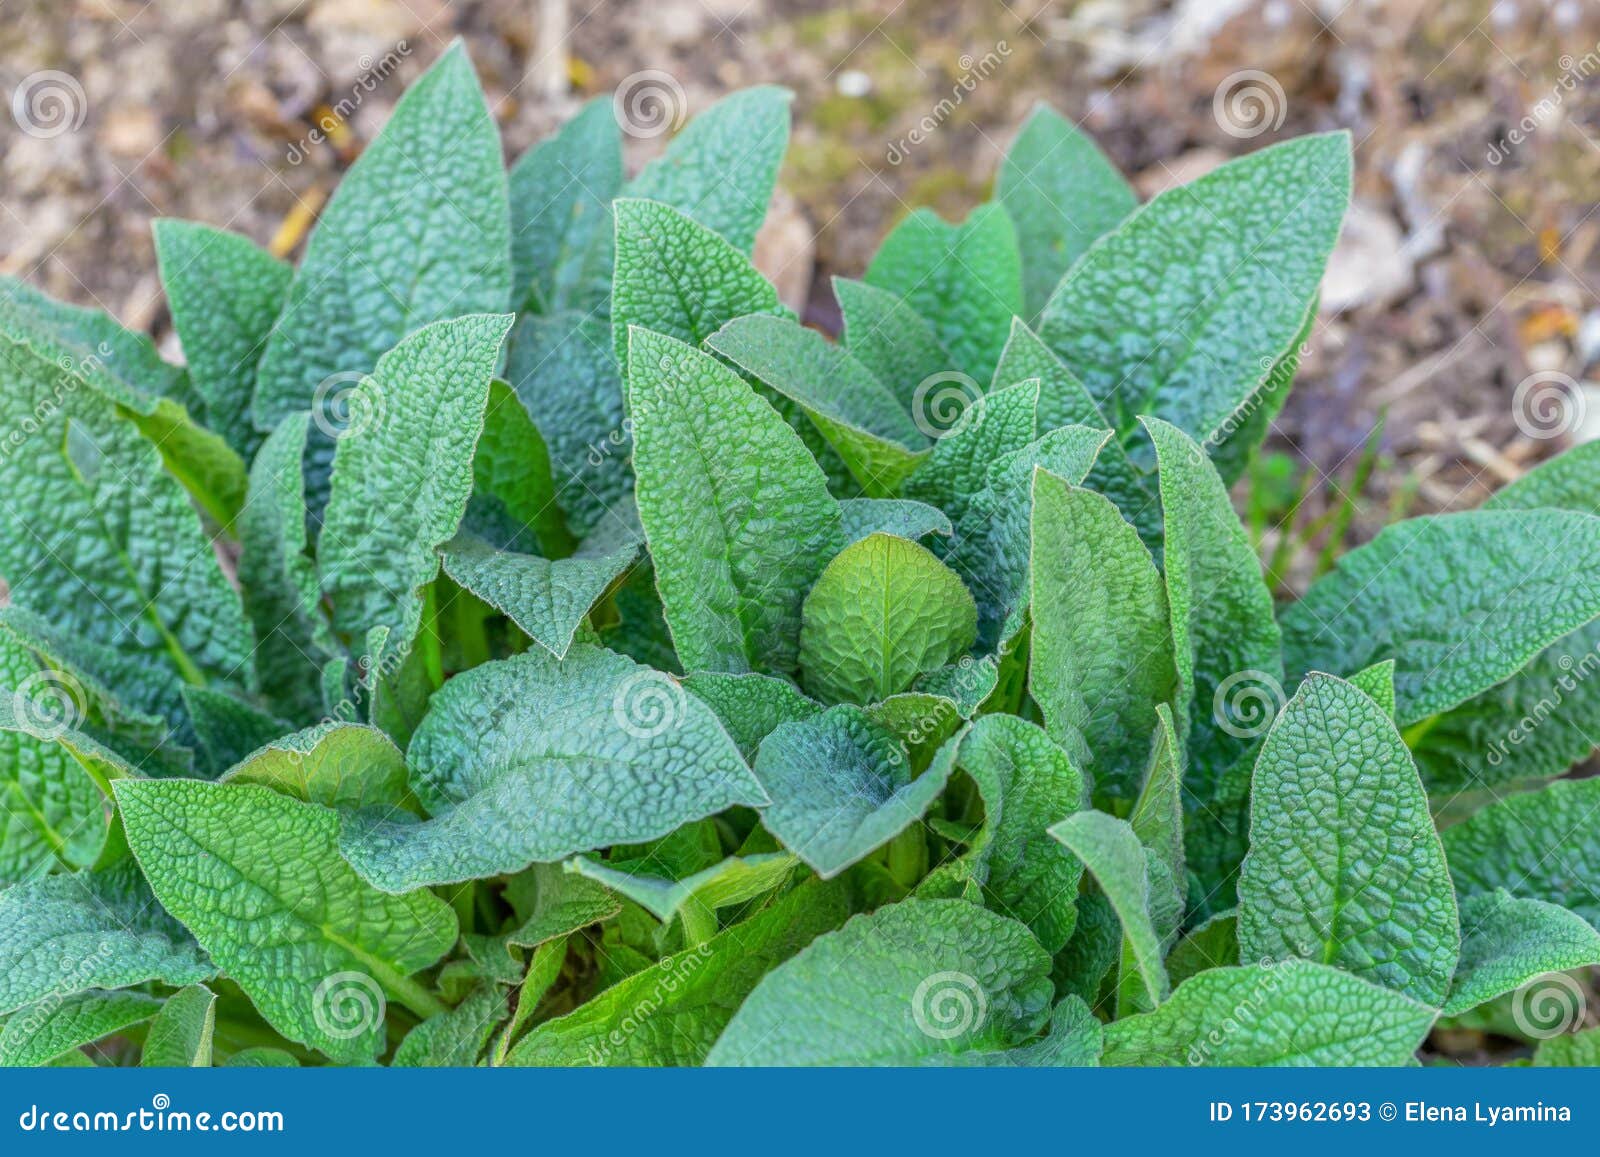 green young leaves of comfrey,symphytum asperum.selective focus.concept of usefulness of plants in medicine, fertilizer for the